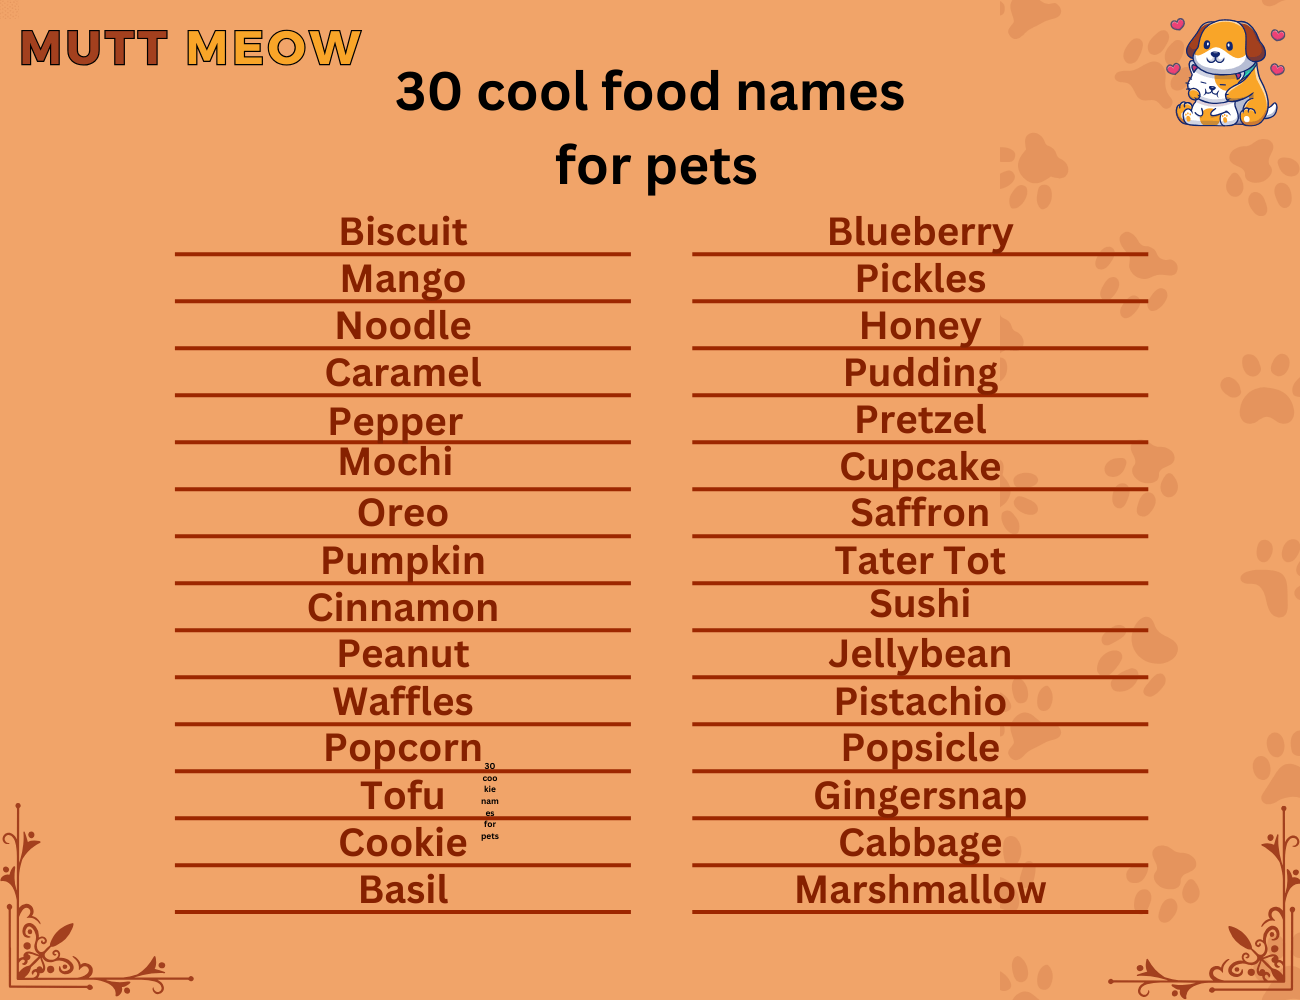 30 cool food names for pets